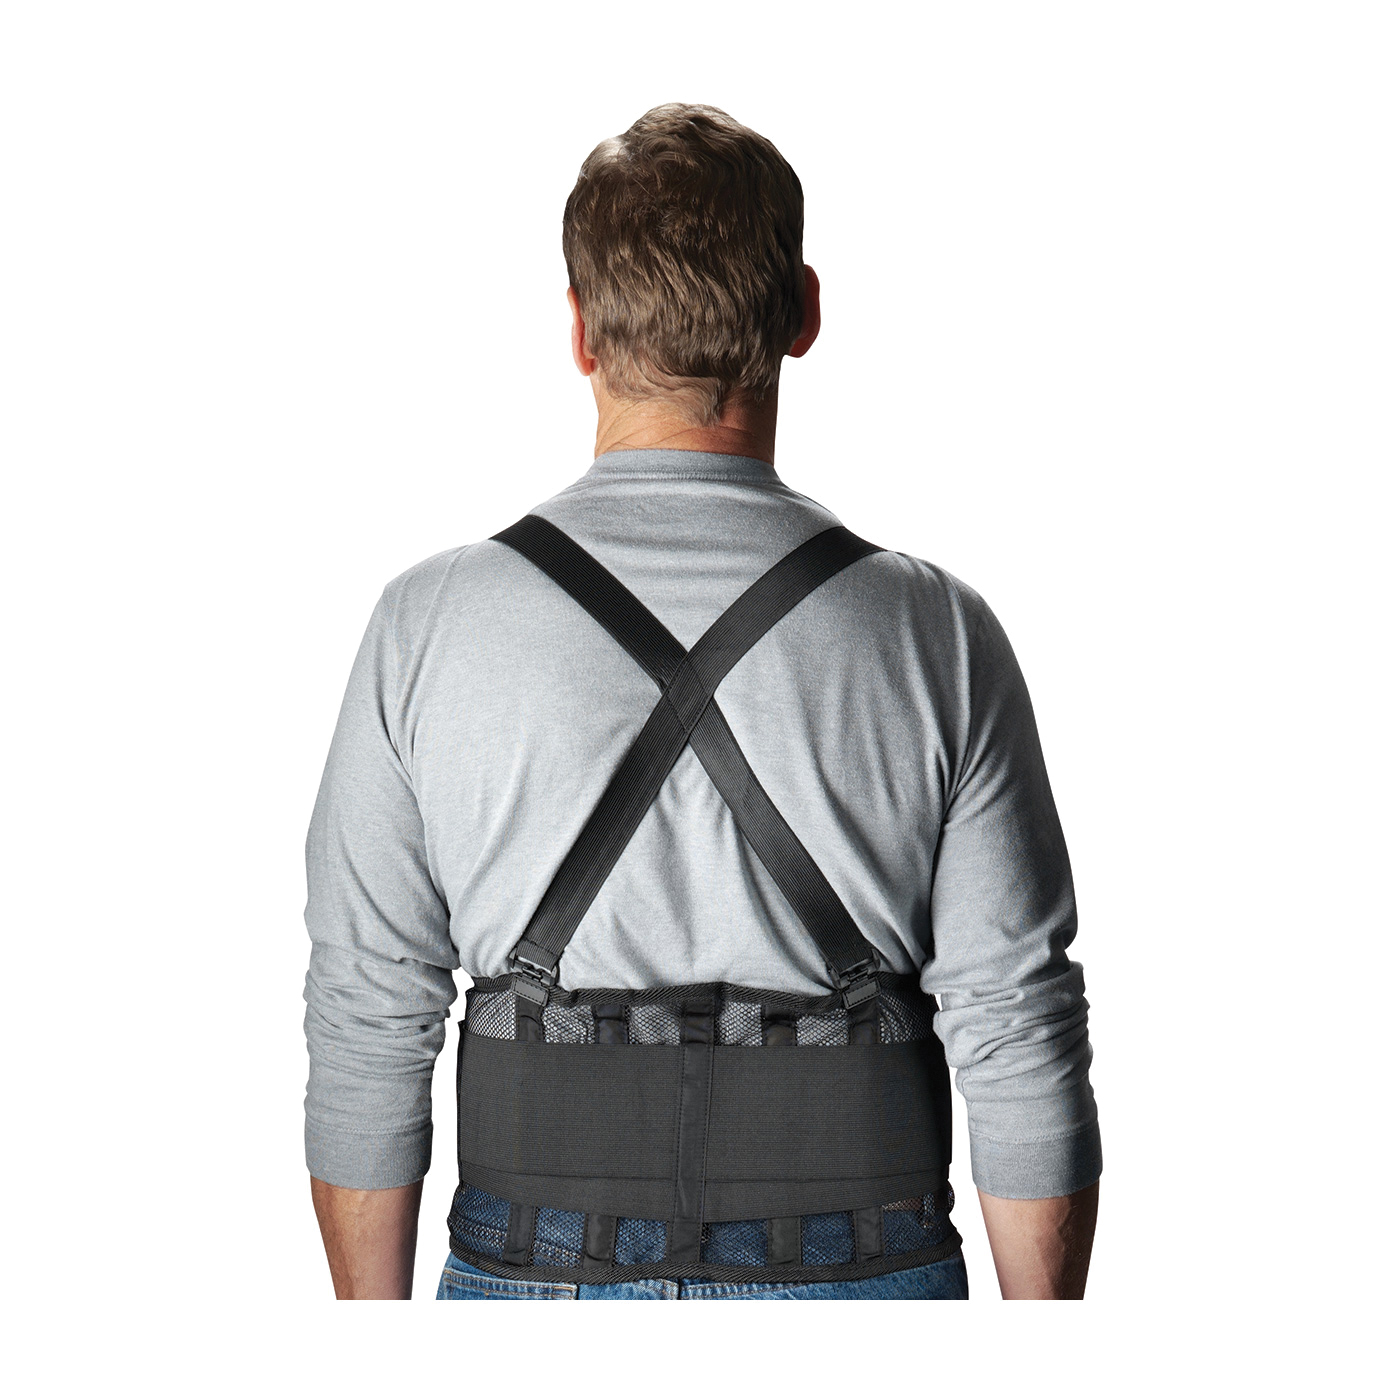 PIP® 290-440L Ergonomic Back Support Belt, L, 40 to 44 in Fits Waist, 9 in W, Nylon Mesh, Black, Hook and Loop Closure